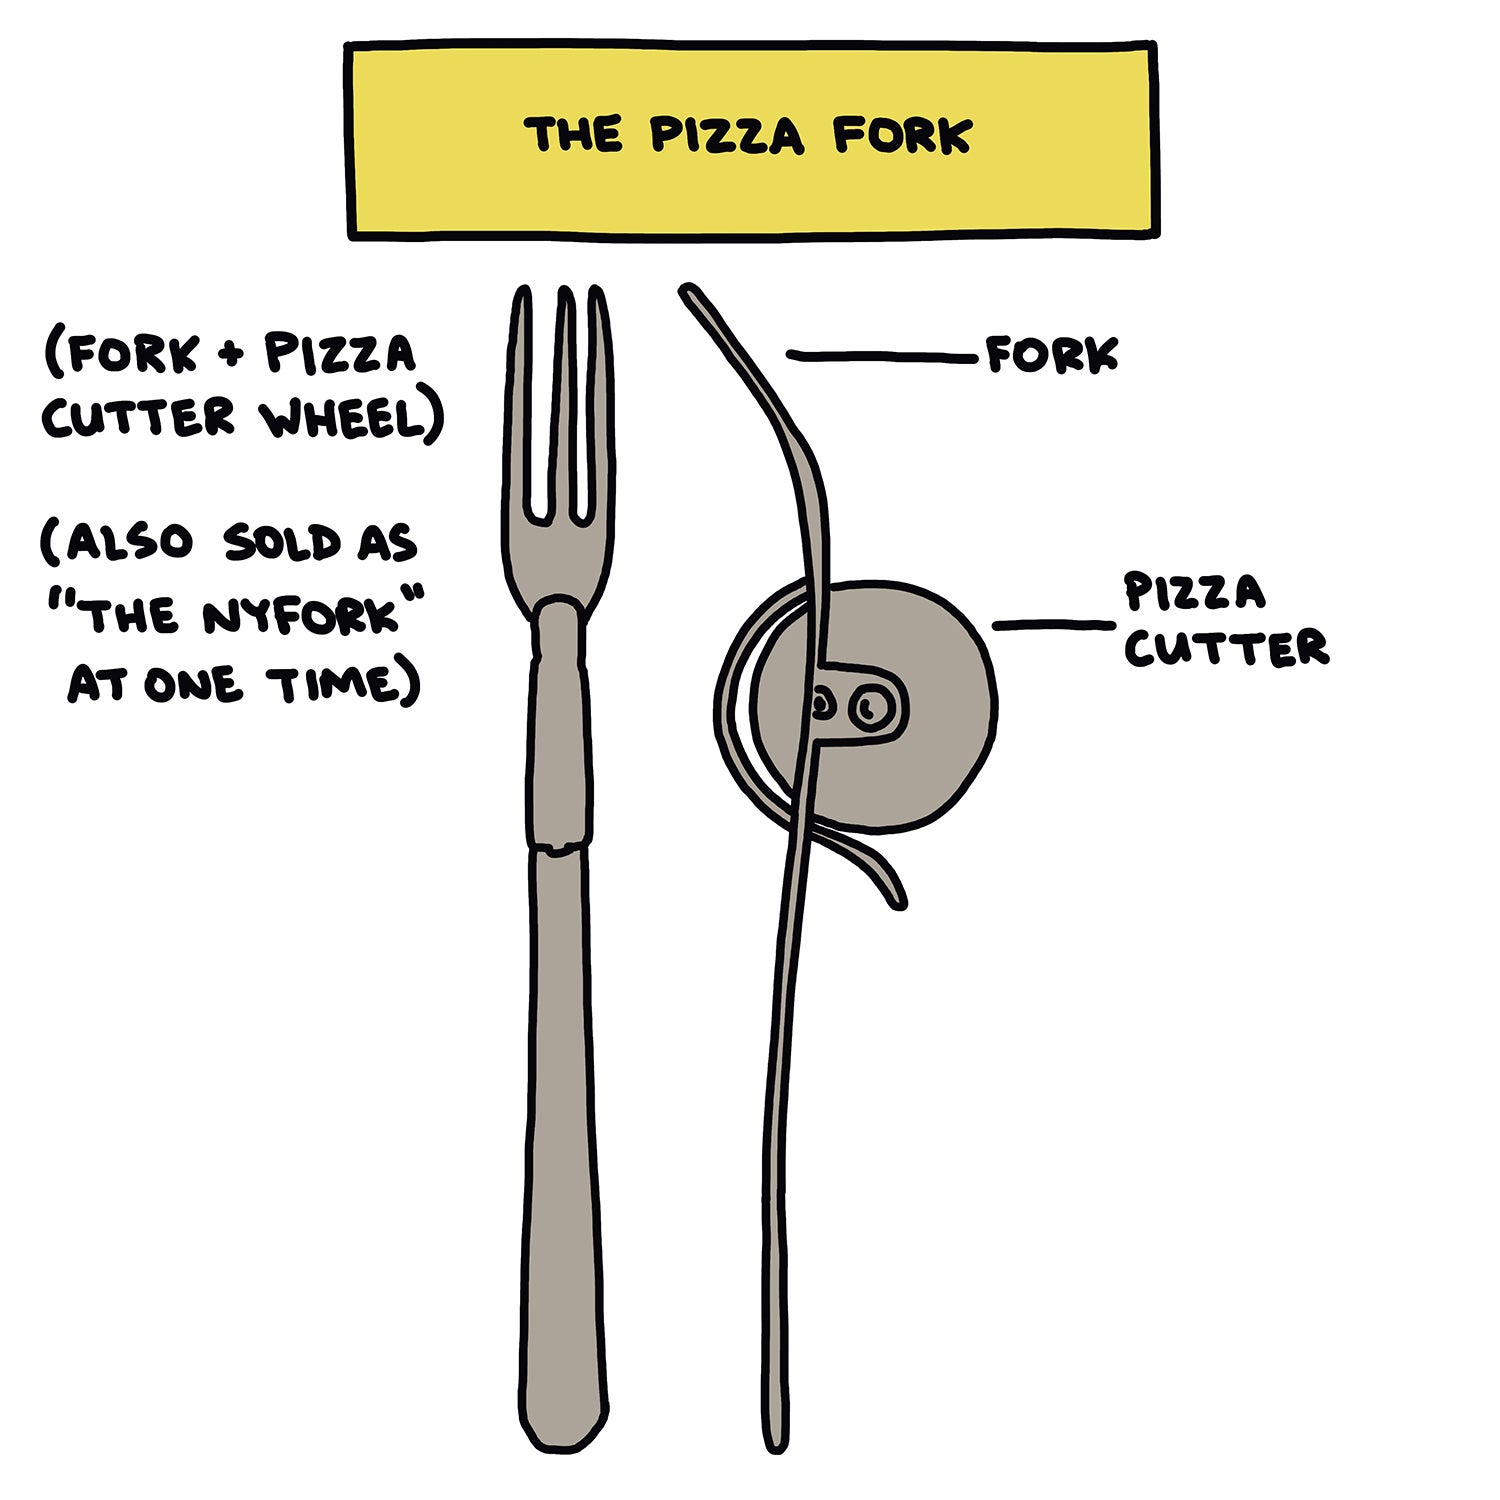 The Pizza Fork